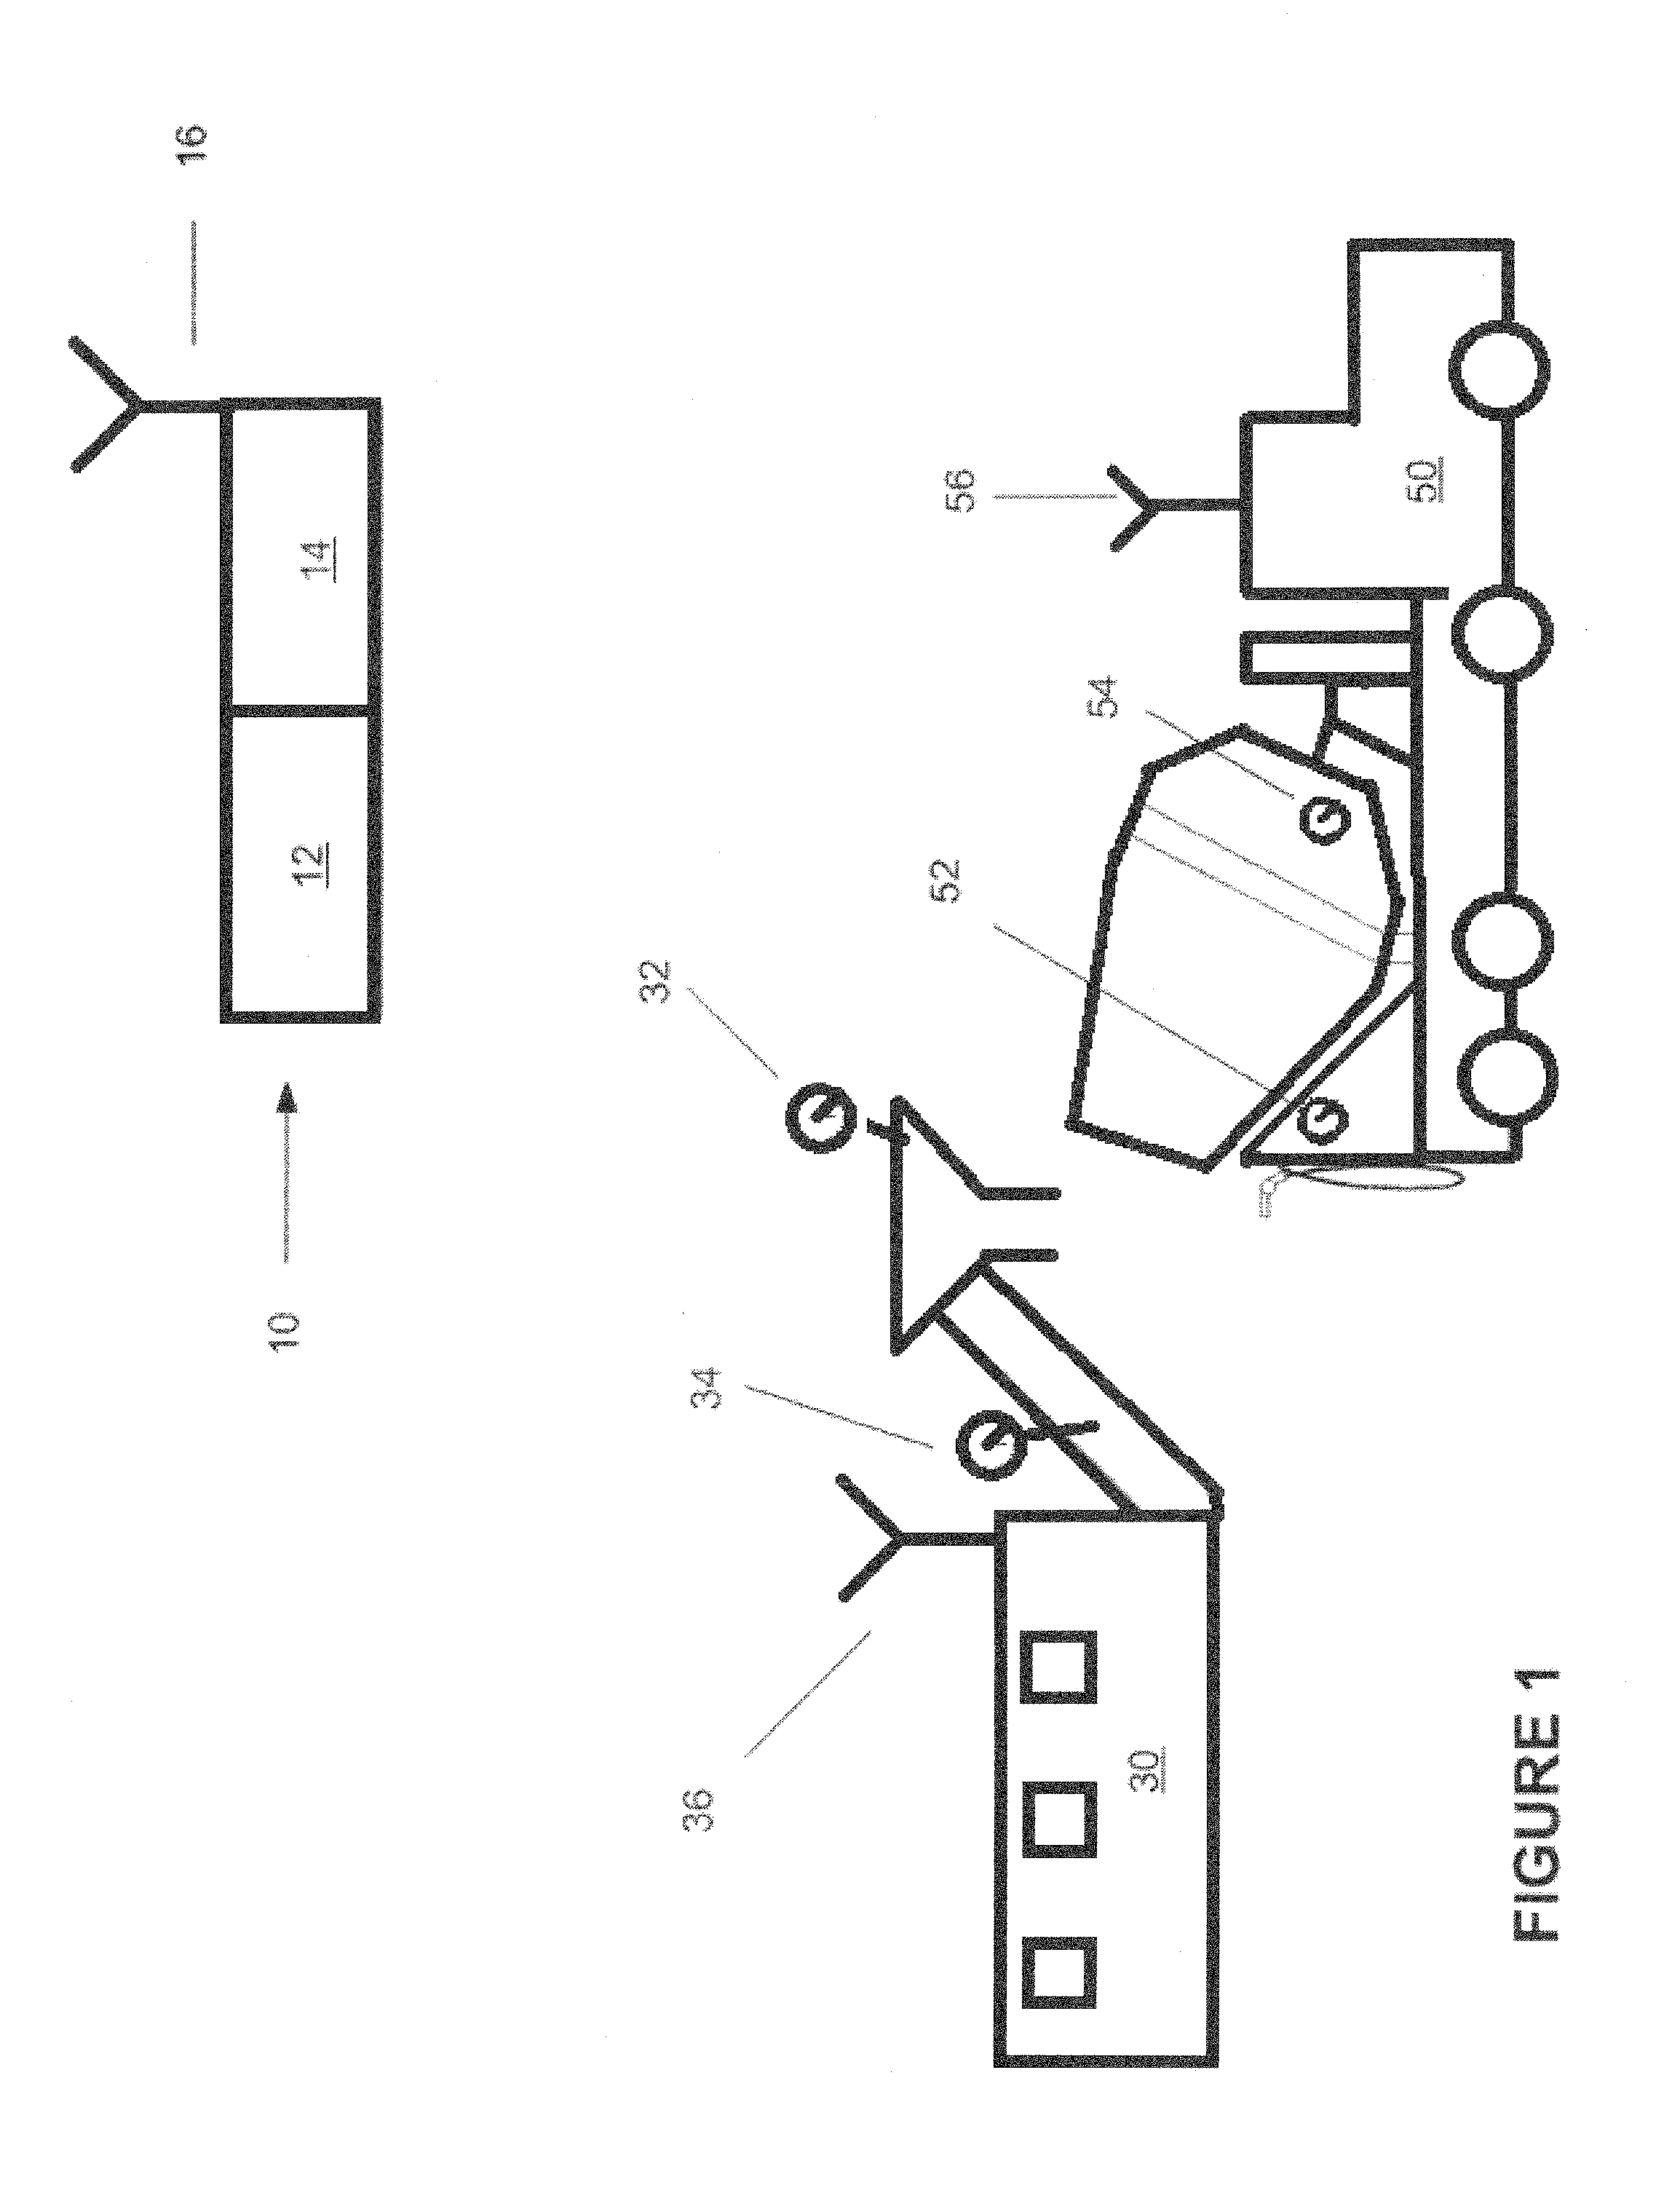 System and Process for Mixing Concrete Having Desired Strength Characteristics